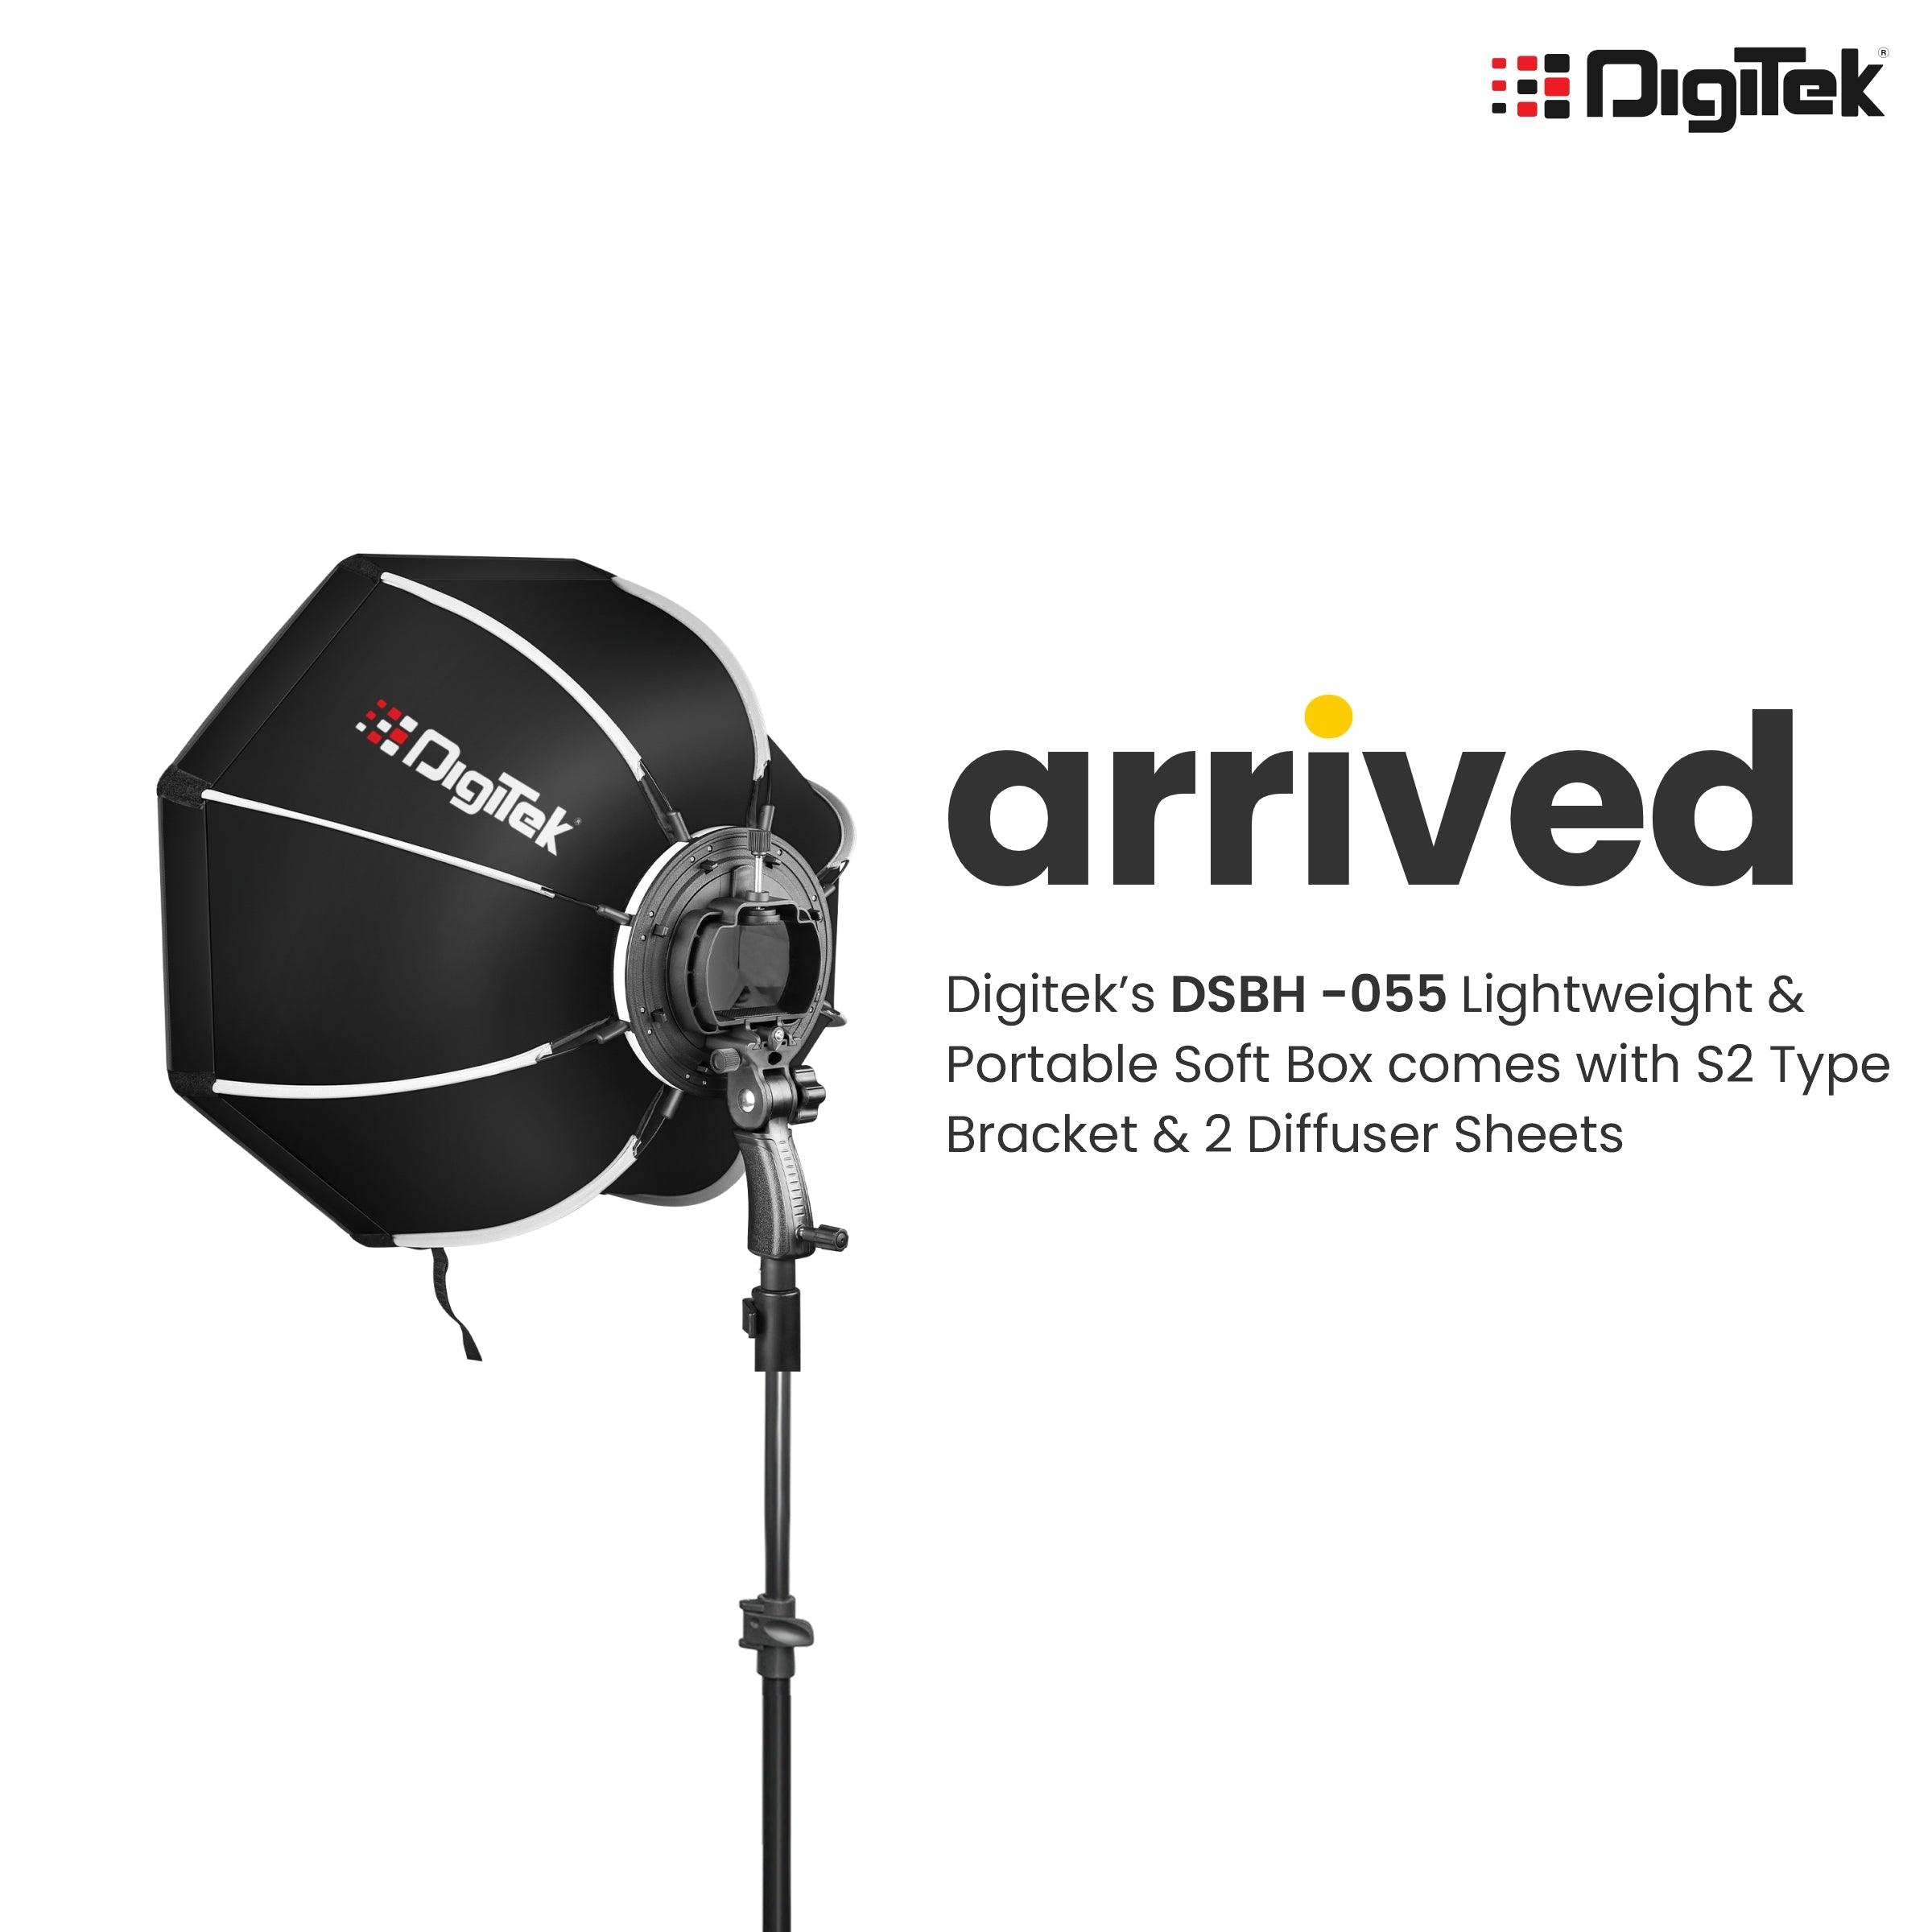 Digitek (DSBH-055) Lightweight & Portable Soft Box Comes with S2 Type Bracket & 2 Diffuser Sheets | Carrying Case | Compatible with All Flash Speedlights - Digitek